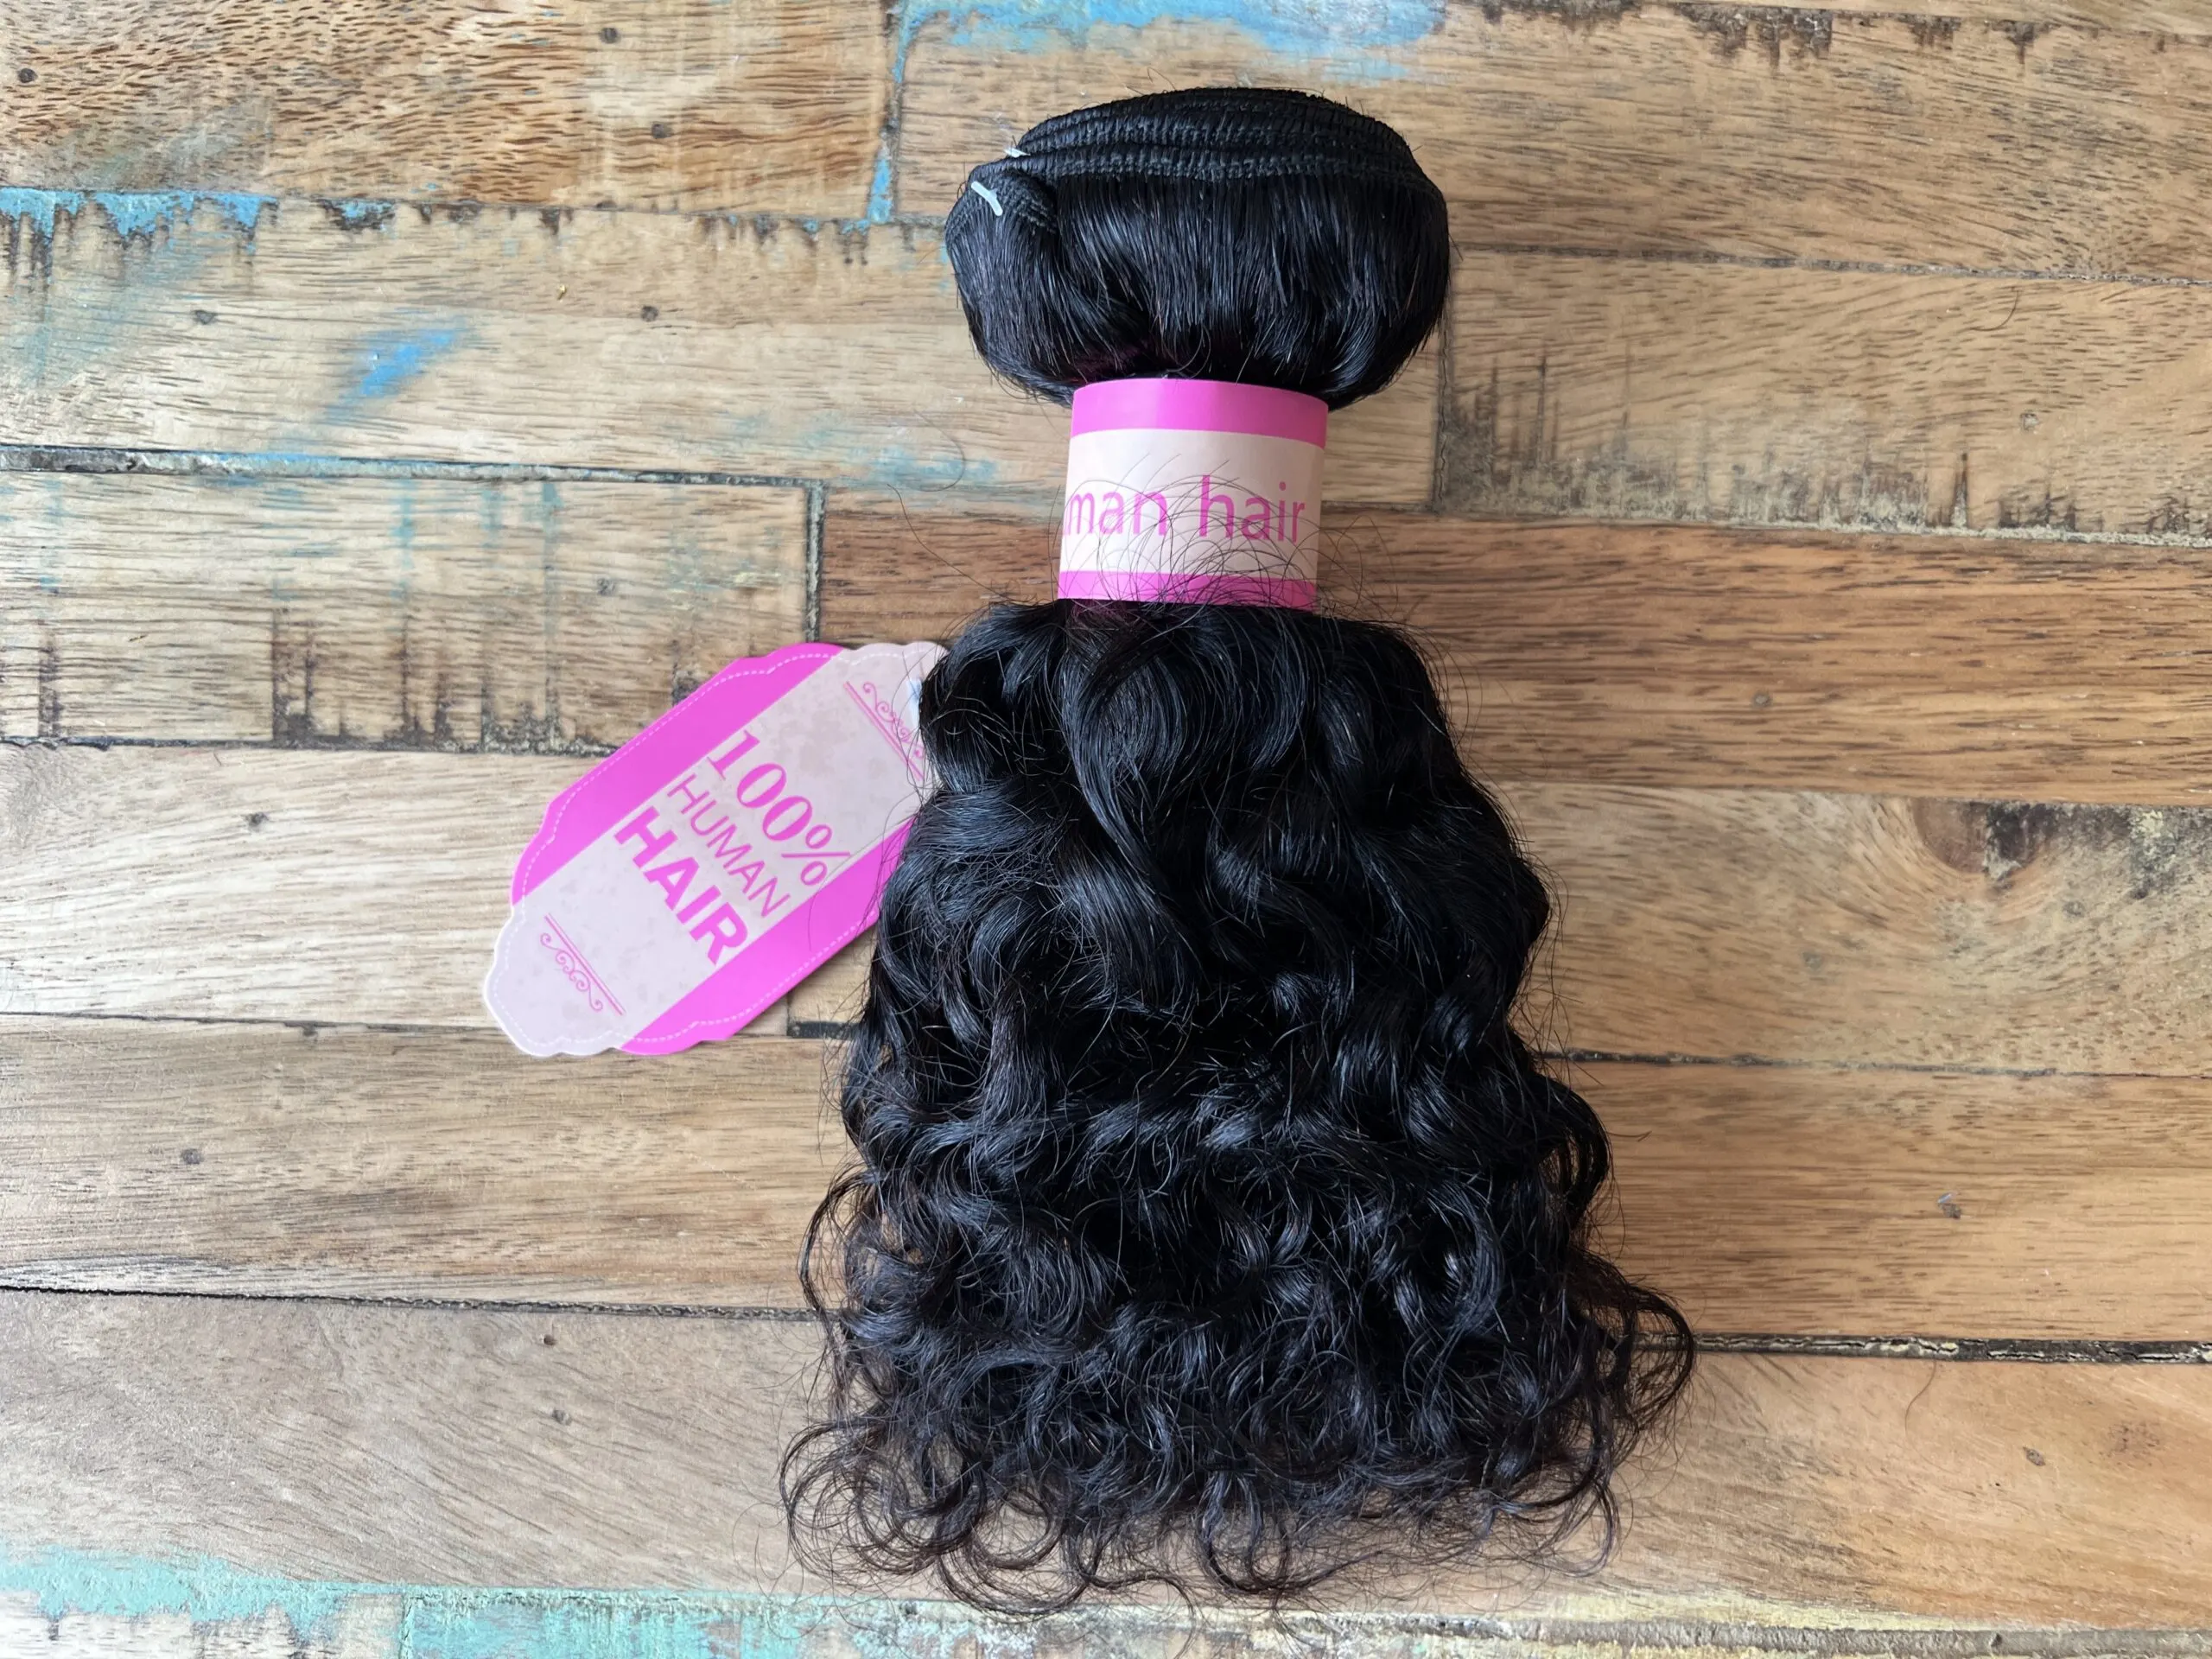 100% human hair extensions that are perfect for ladies that want voluminous big hair or a full head of natural-looking curls. These extensions can also be used to create curly ponytails.